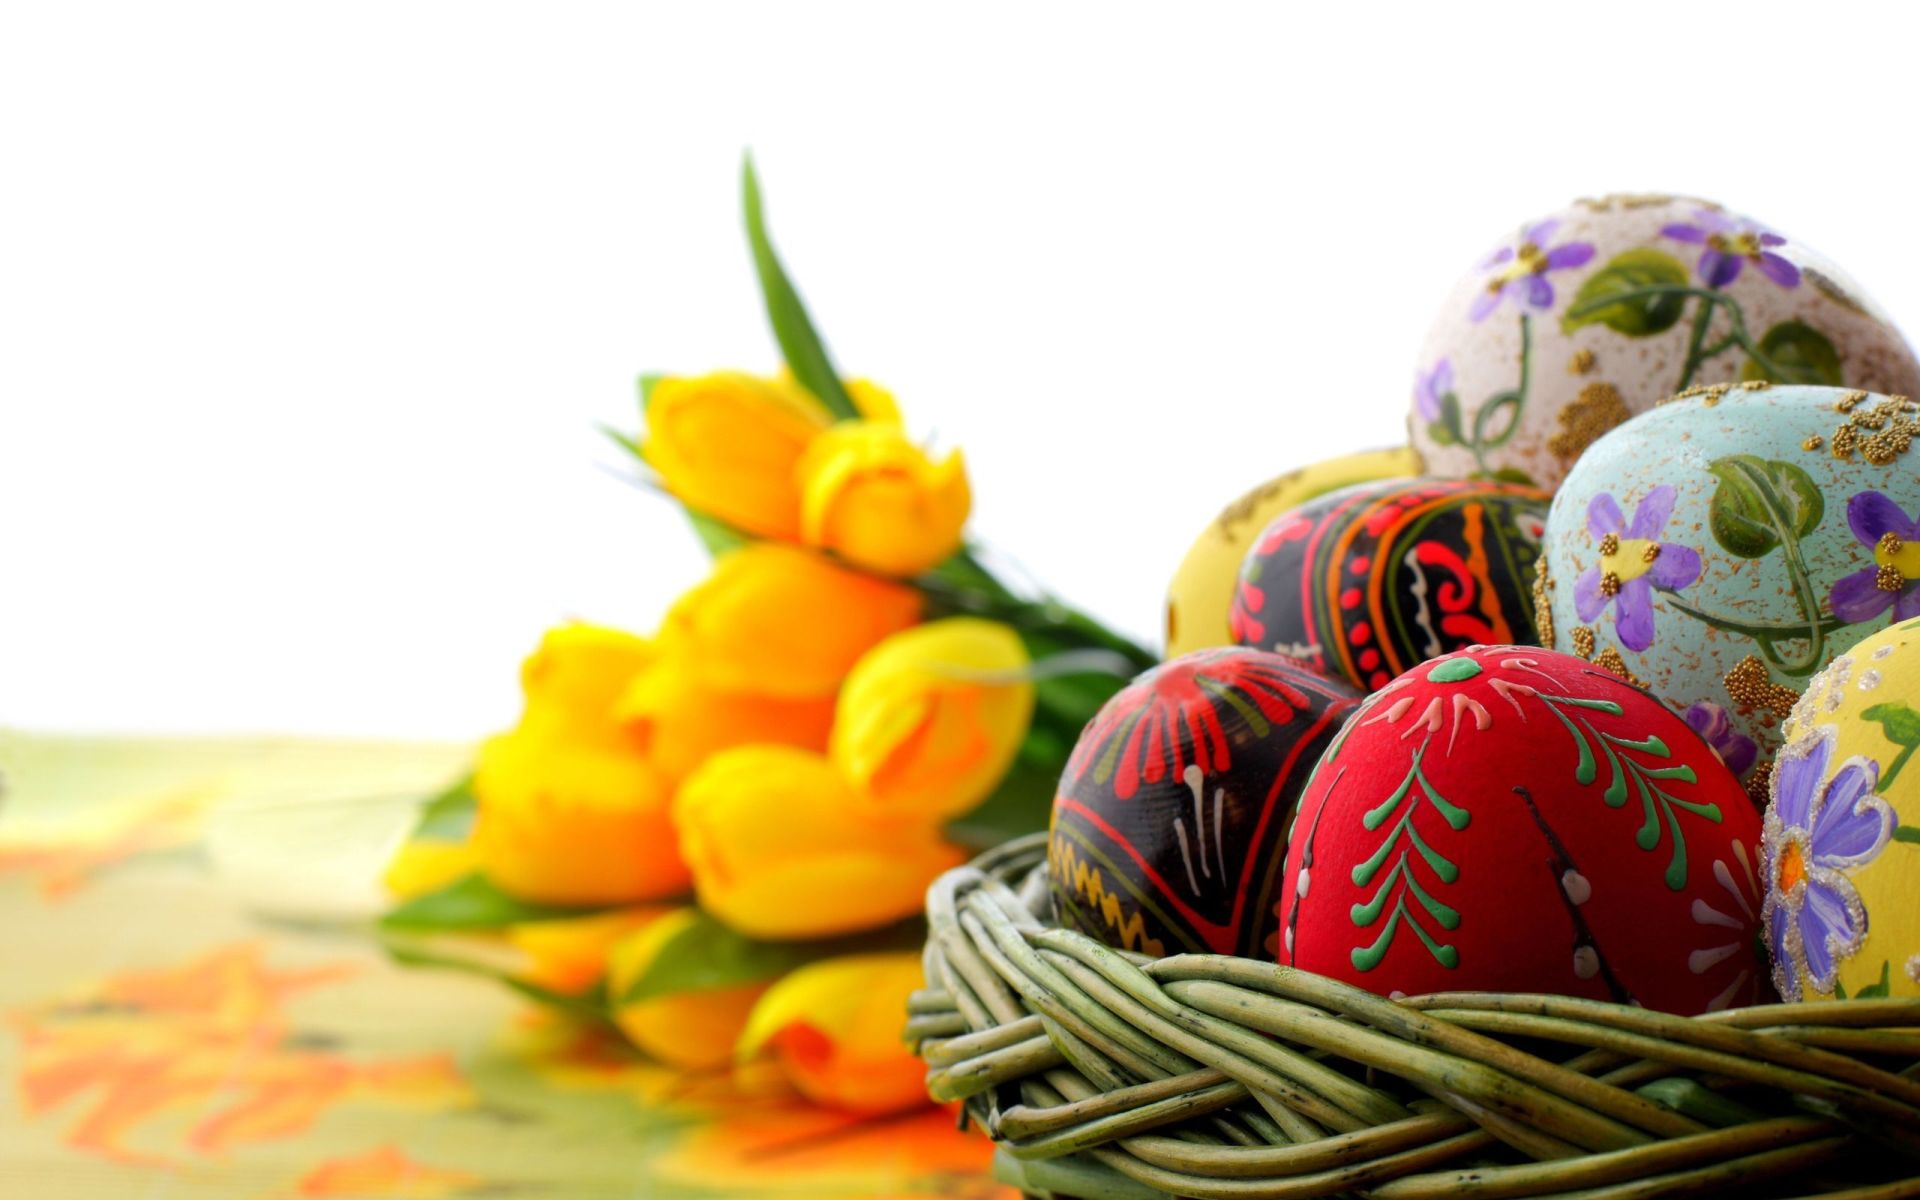 Easter Backgrounds For Your Laptop (4)